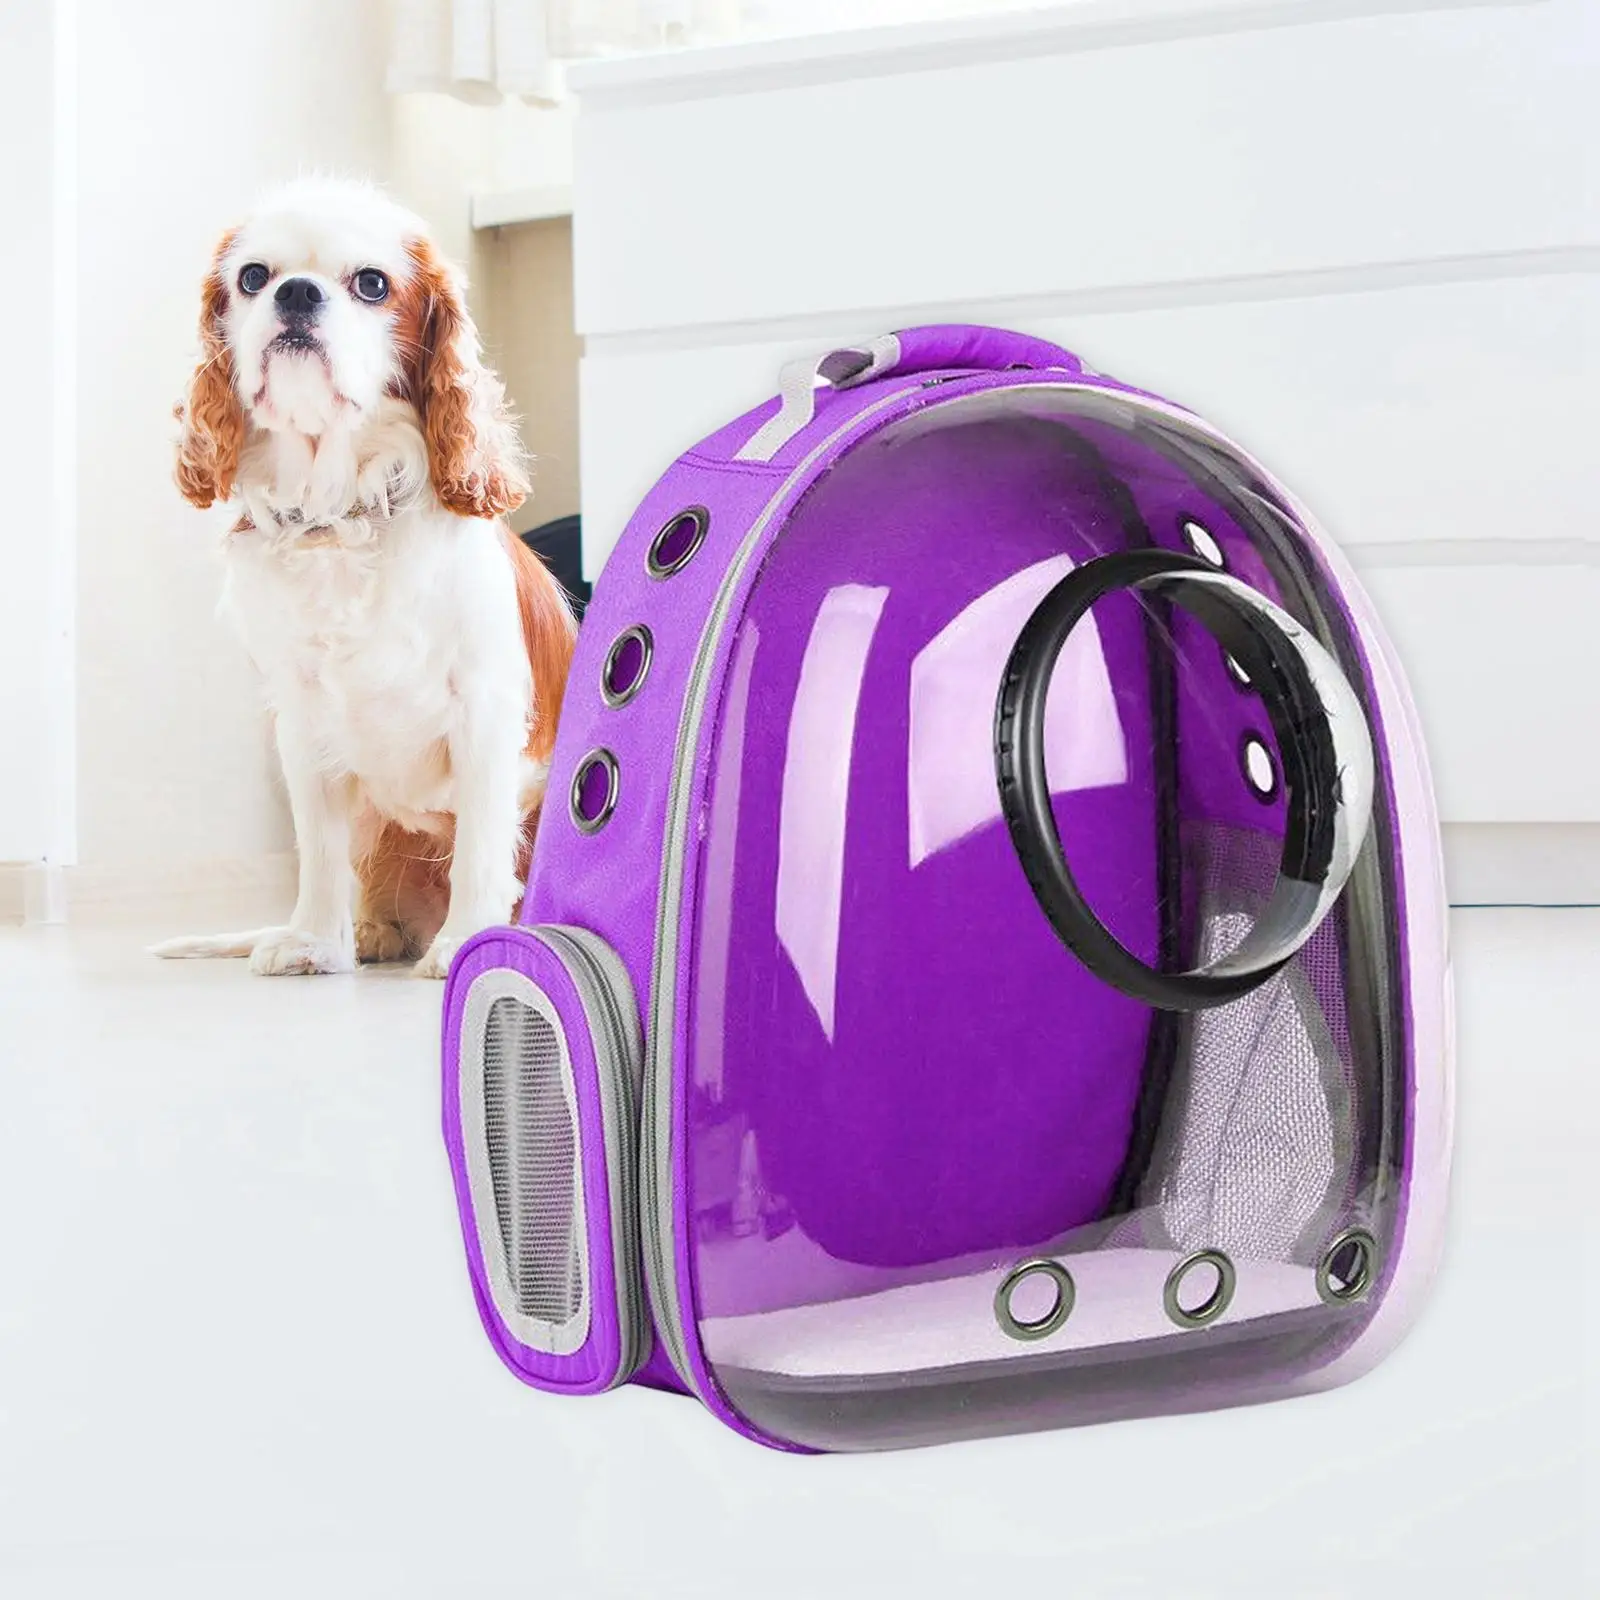 Pet Backpack Handbag Breathable Space Capsule Heat Proof Bubble Bag Dog Cat Carrier Bag for Small Cute Pet Travel Hiking Camping